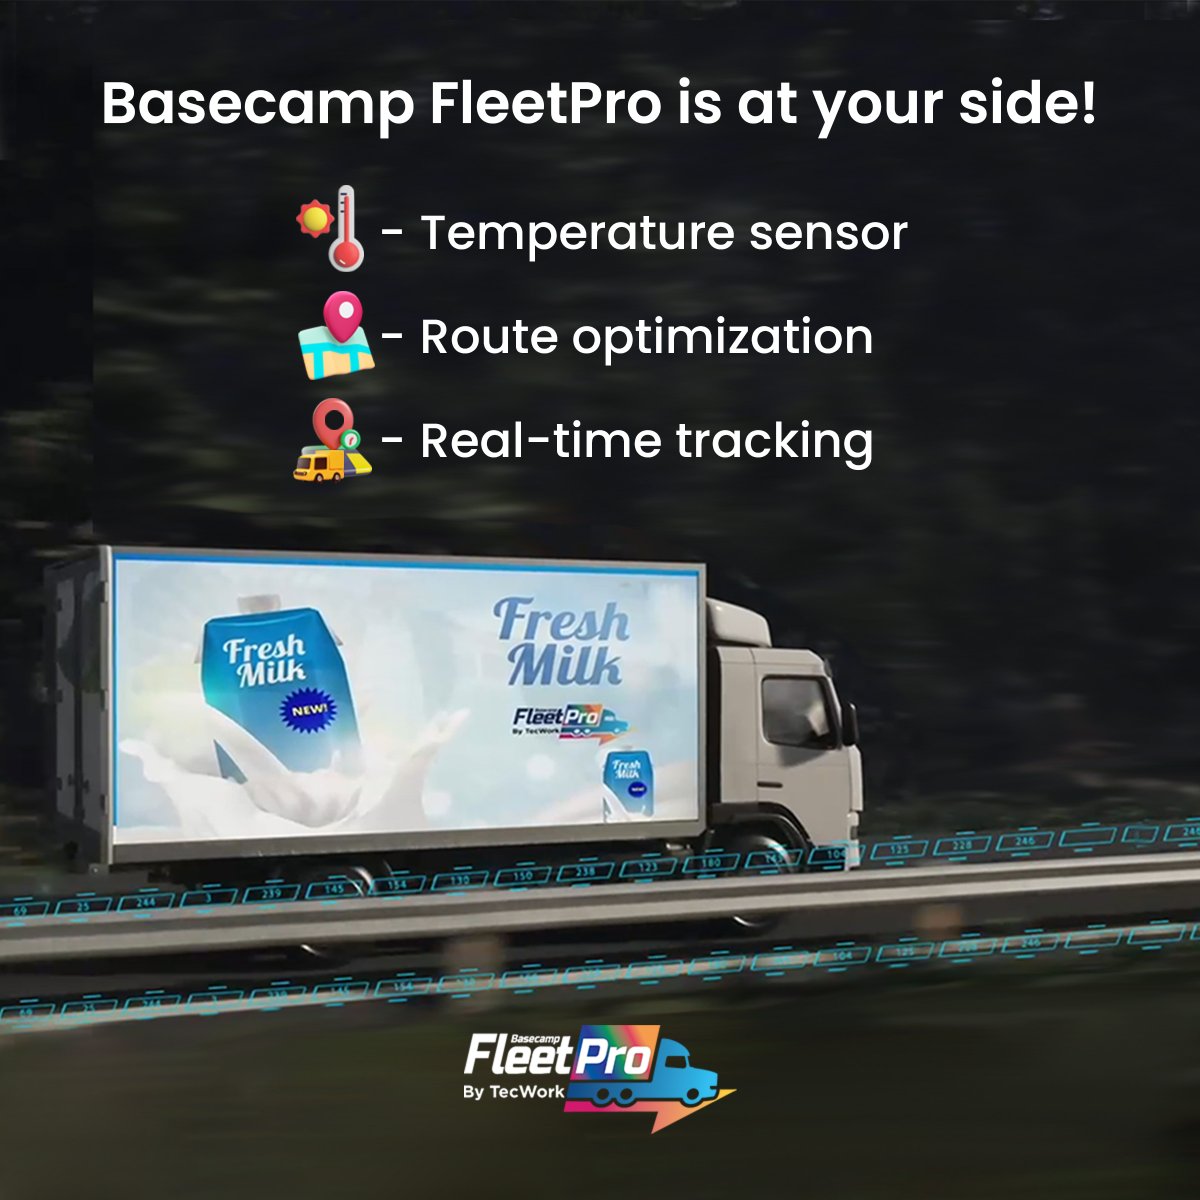 Basecamp FleetPro is an ideal Fleet Management Software with its temperature sensor, which prevents milk from curdling, thereby ensuring your customers receive good quality milk. bit.ly/milk-tankers

#fleetmanagement #fleetsoftware #gpstracking #vehicletracking #technology